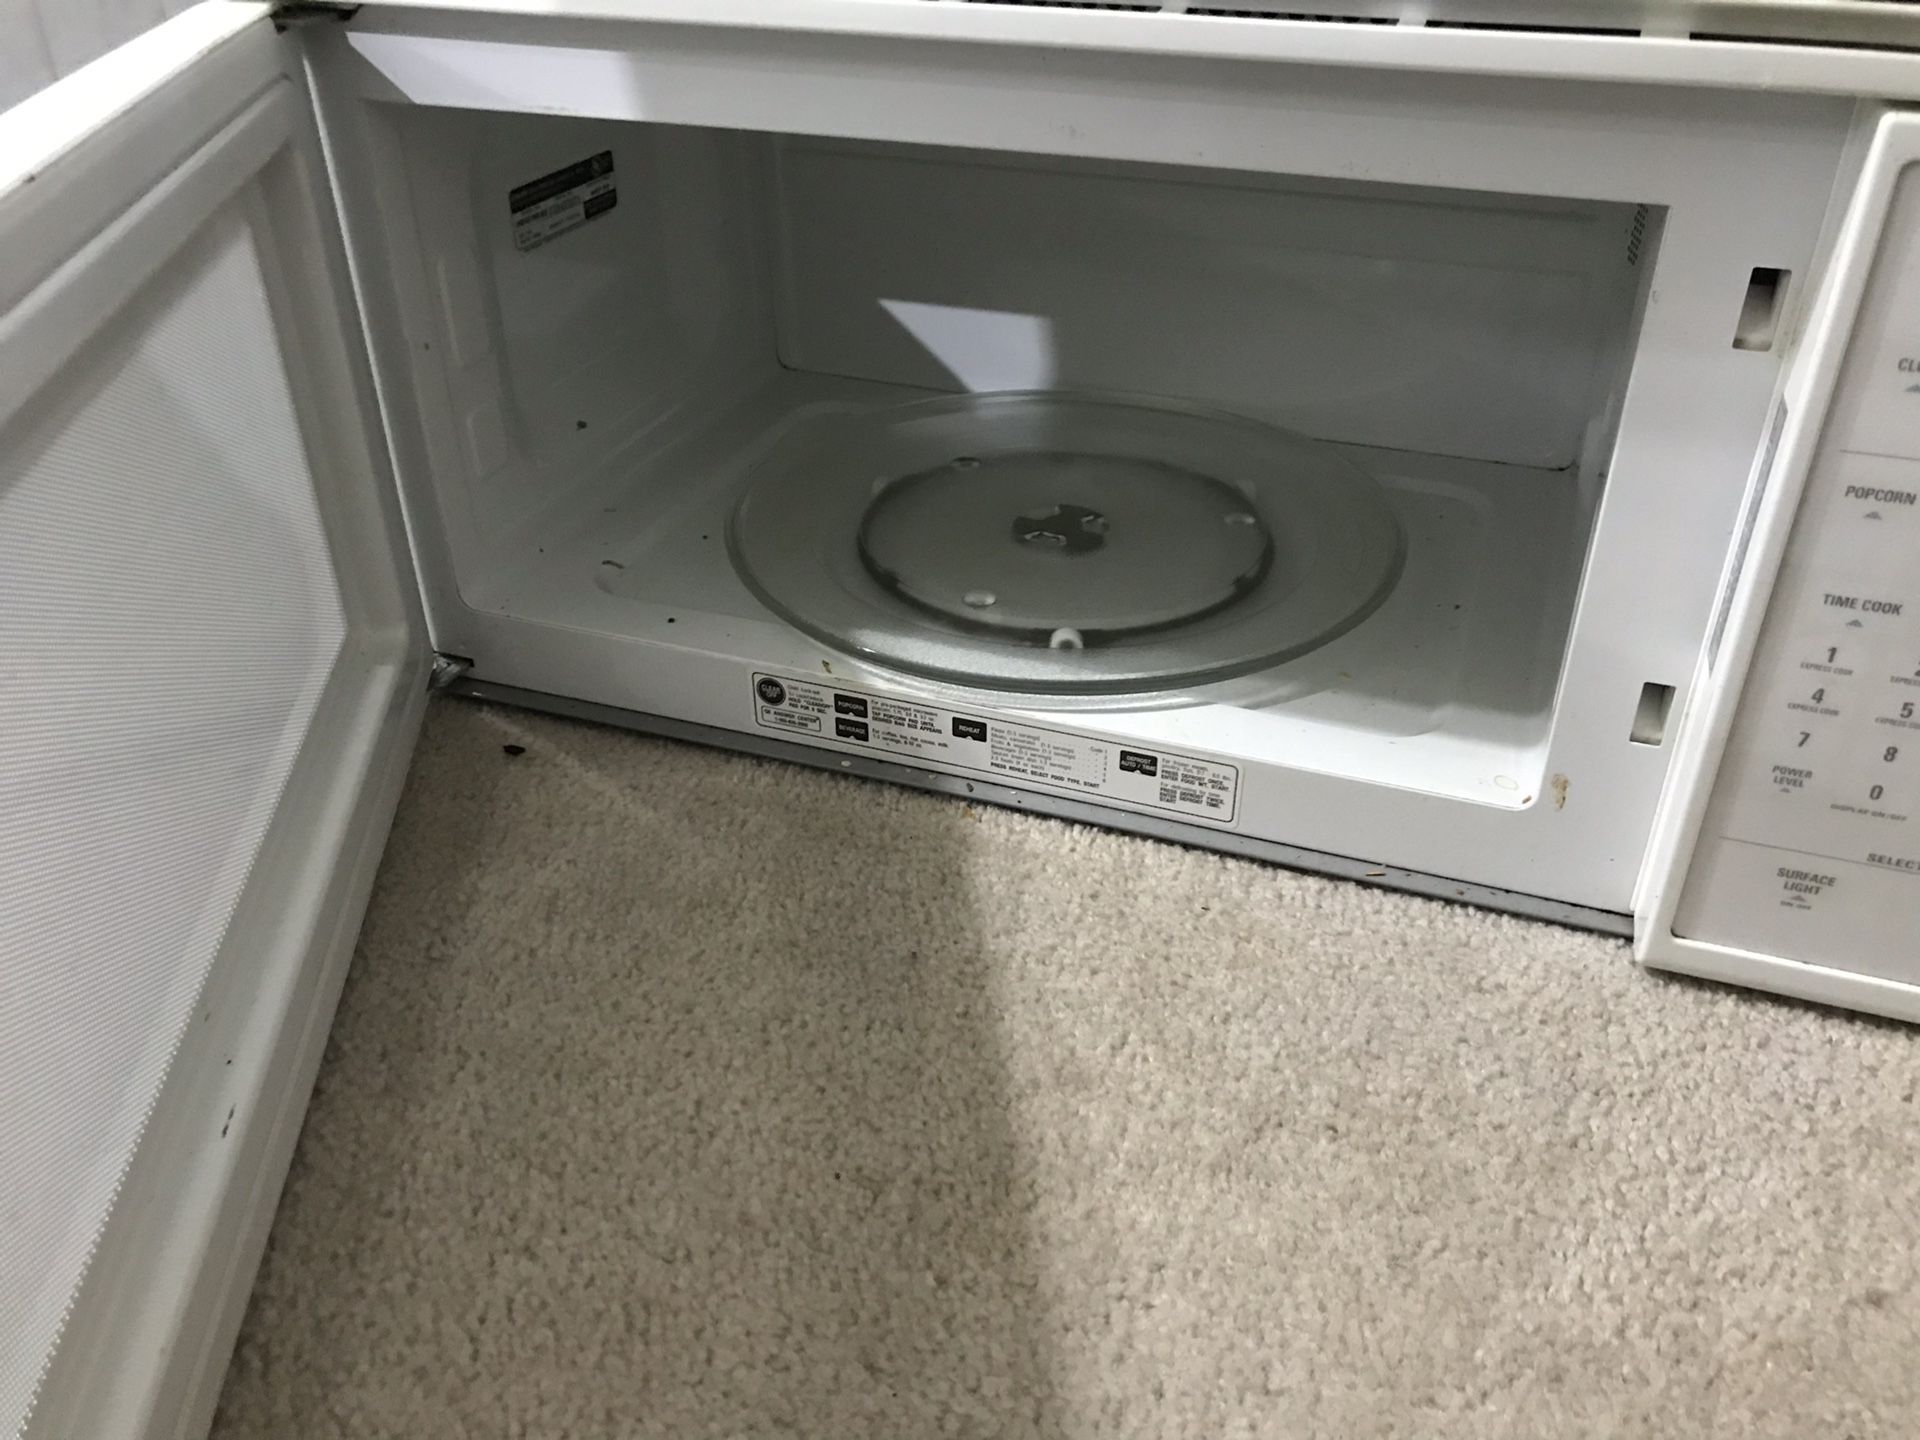 Under the cabinet microwave